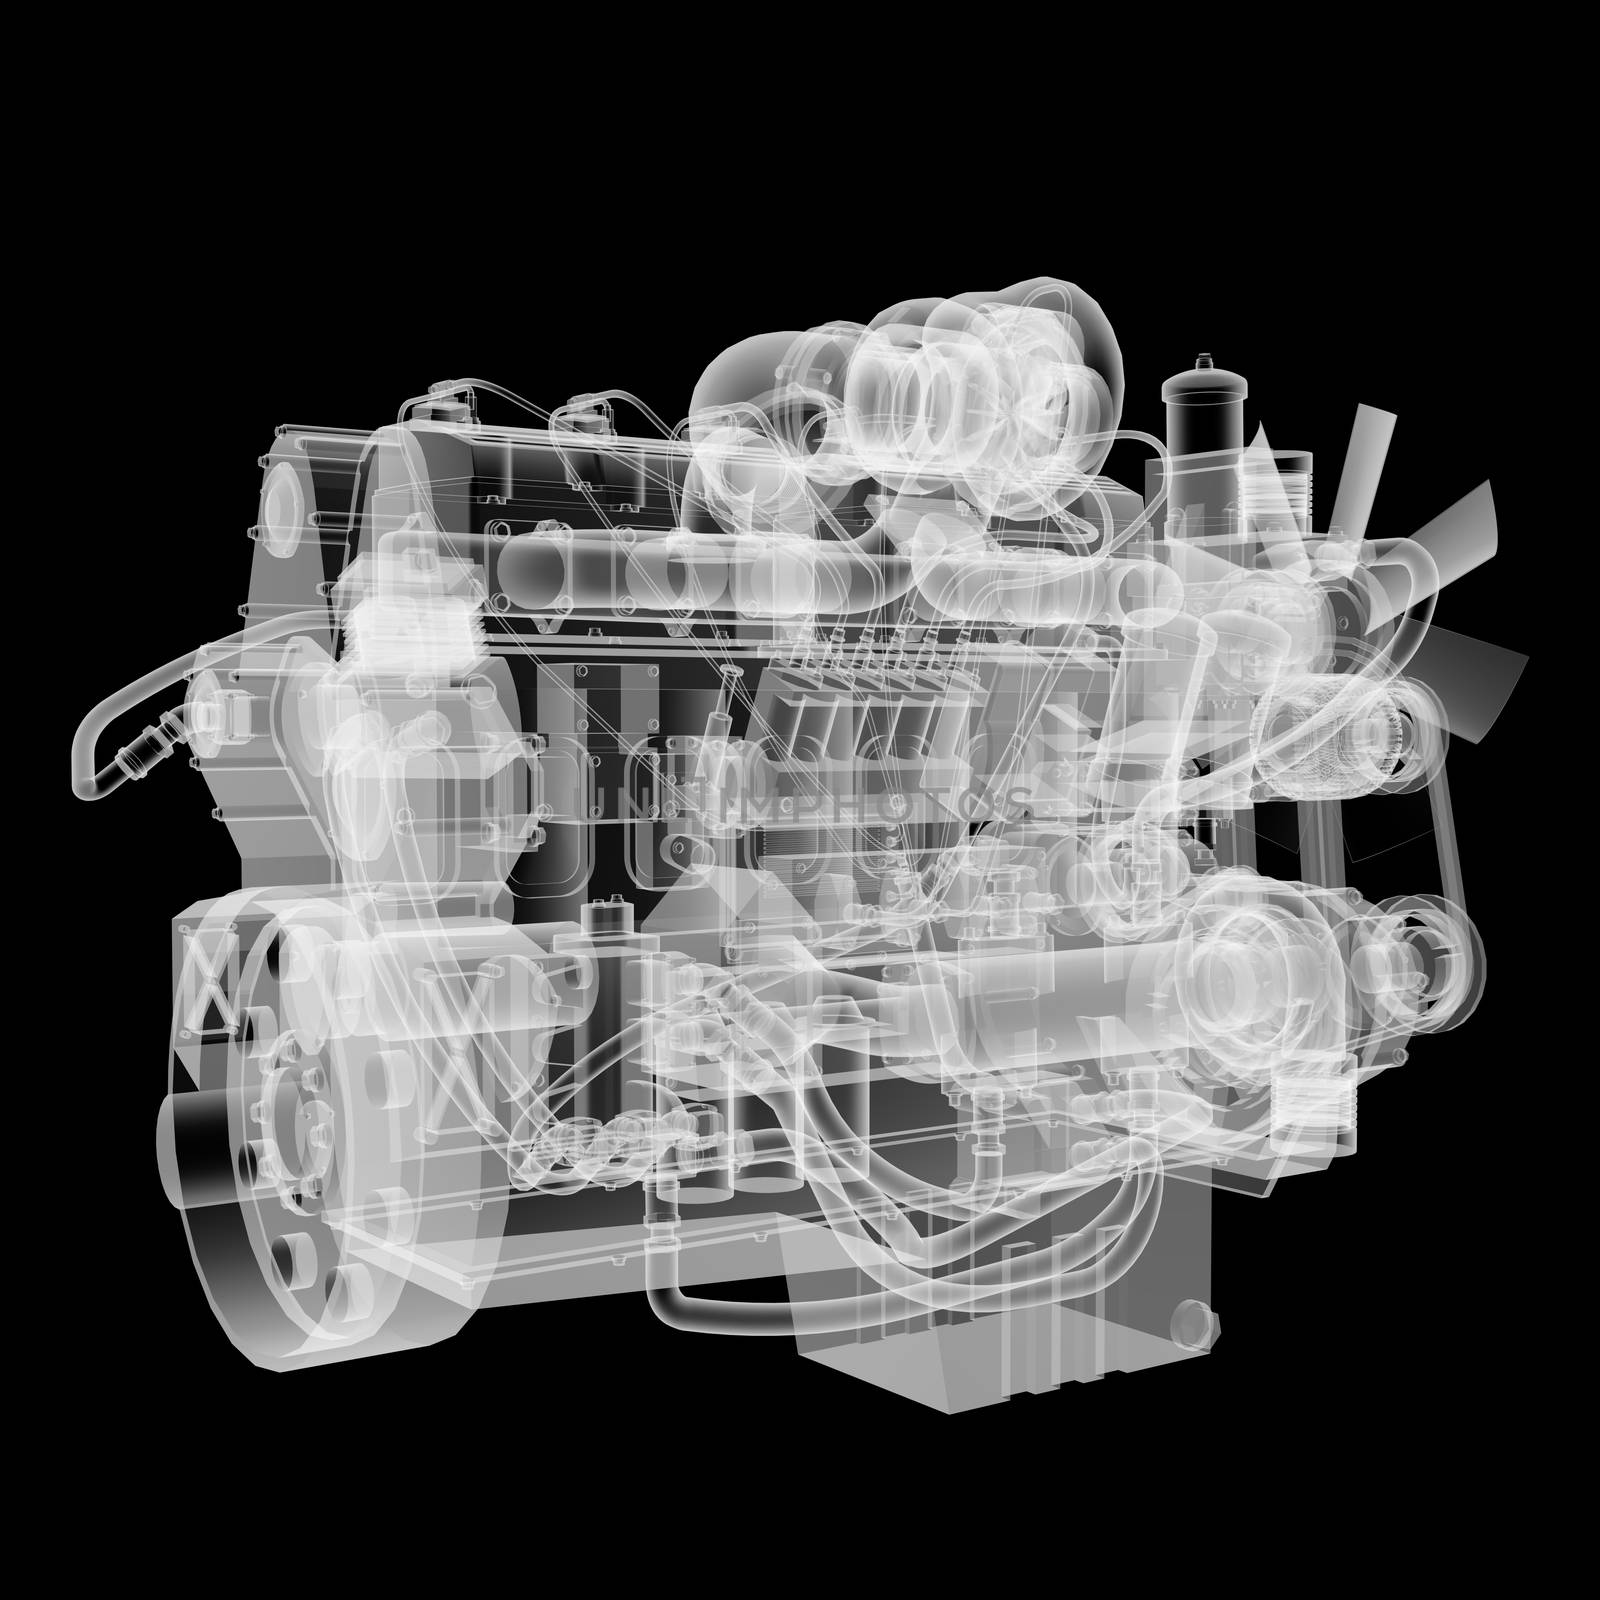 Internal combustion engine X-Ray style. Isolated on black background. 3D illustration